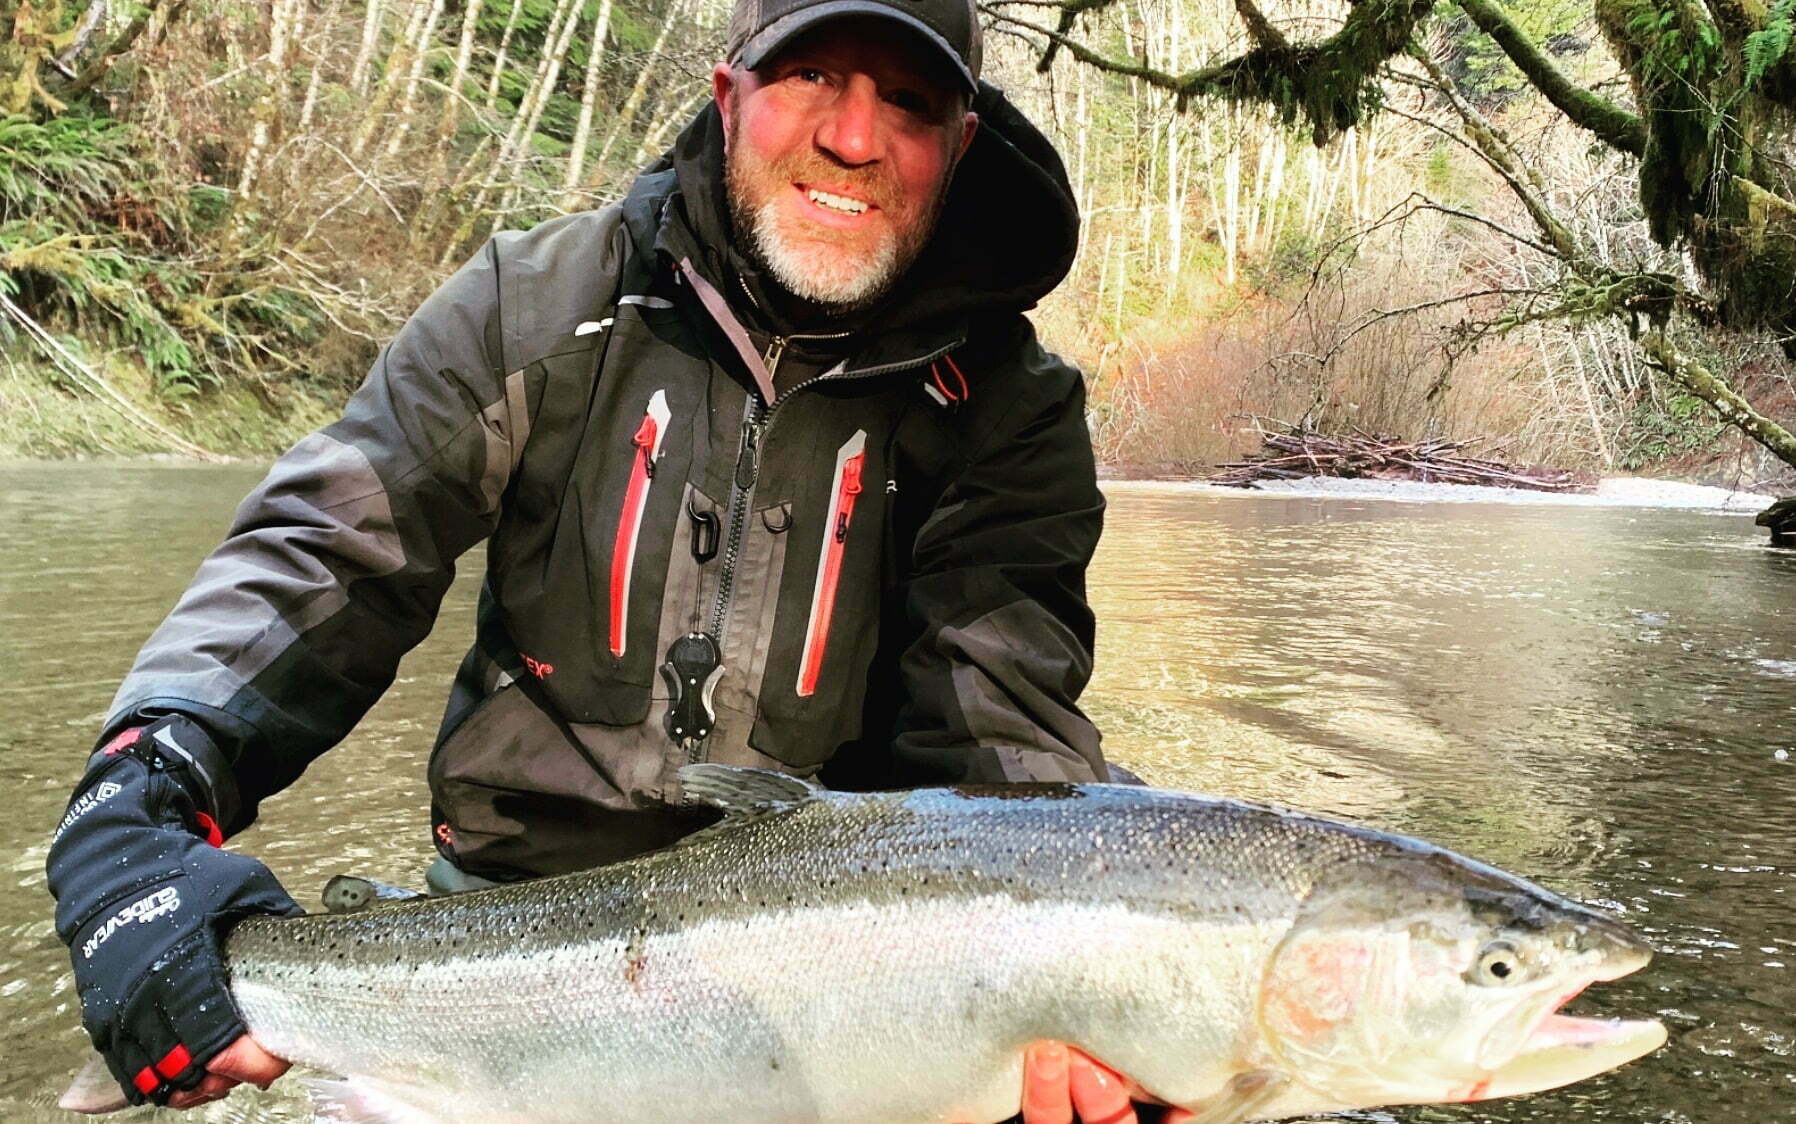 Bead Fishing for Winter Steelhead on Christmas Day - Stone Cold